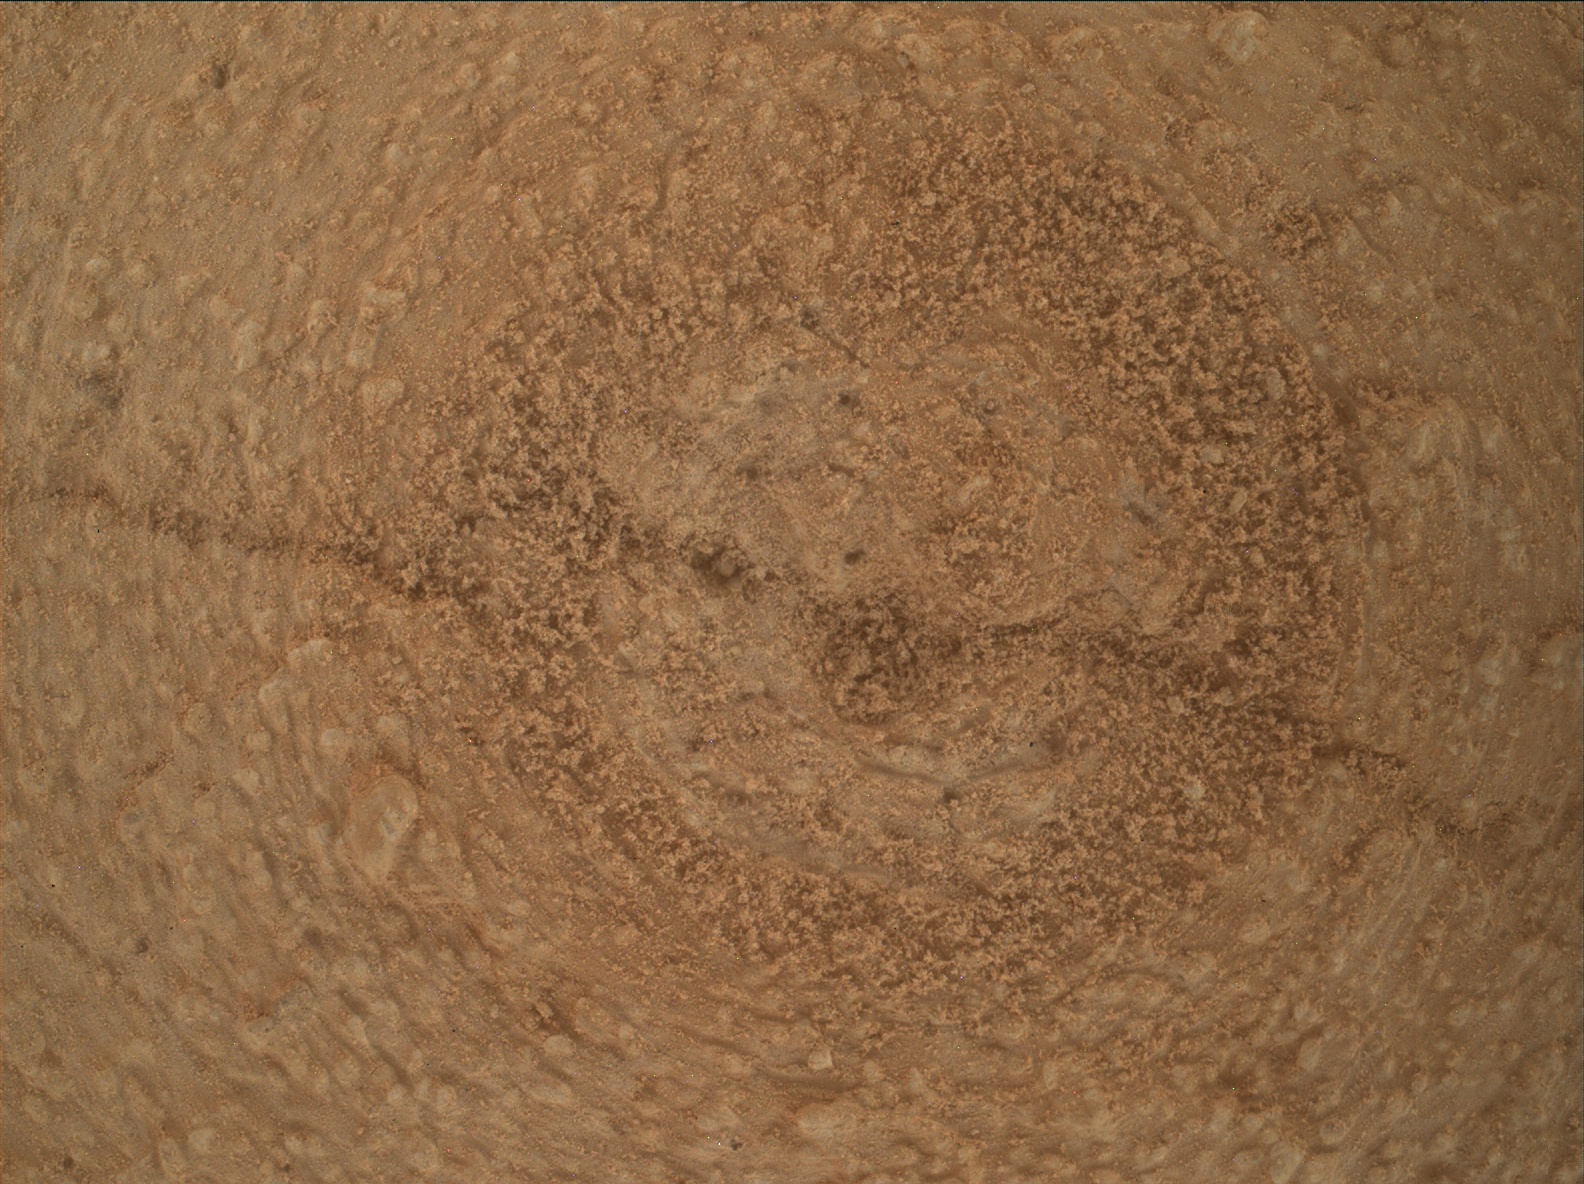 Nasa's Mars rover Curiosity acquired this image using its Mars Hand Lens Imager (MAHLI) on Sol 3799